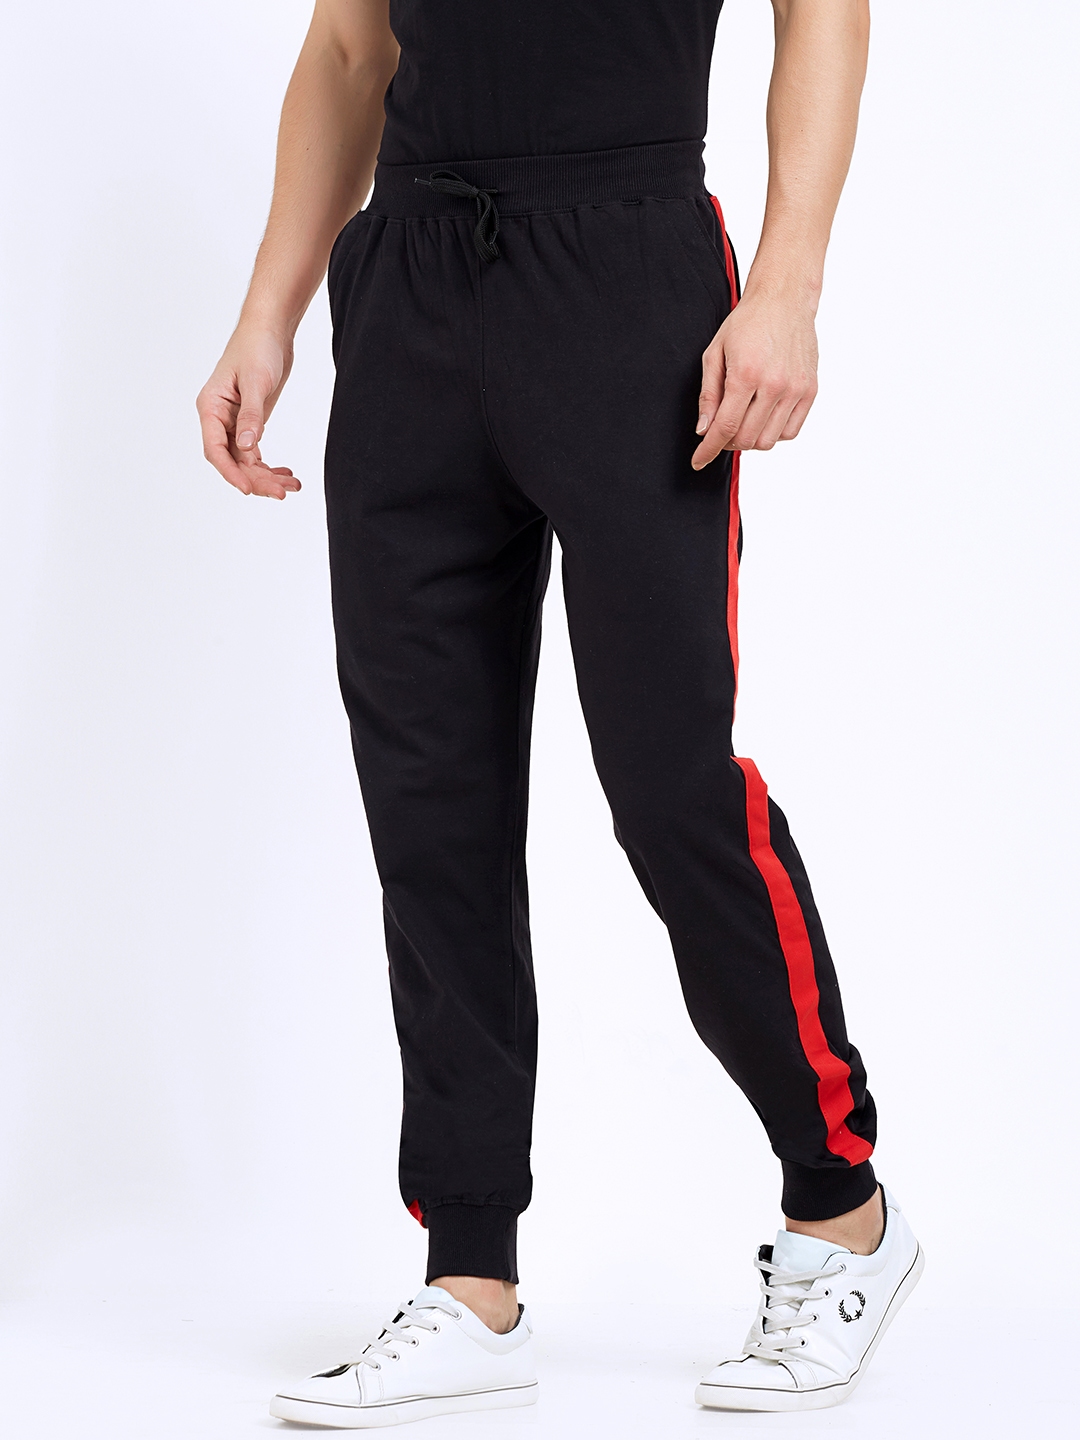 black and red striped trousers mens